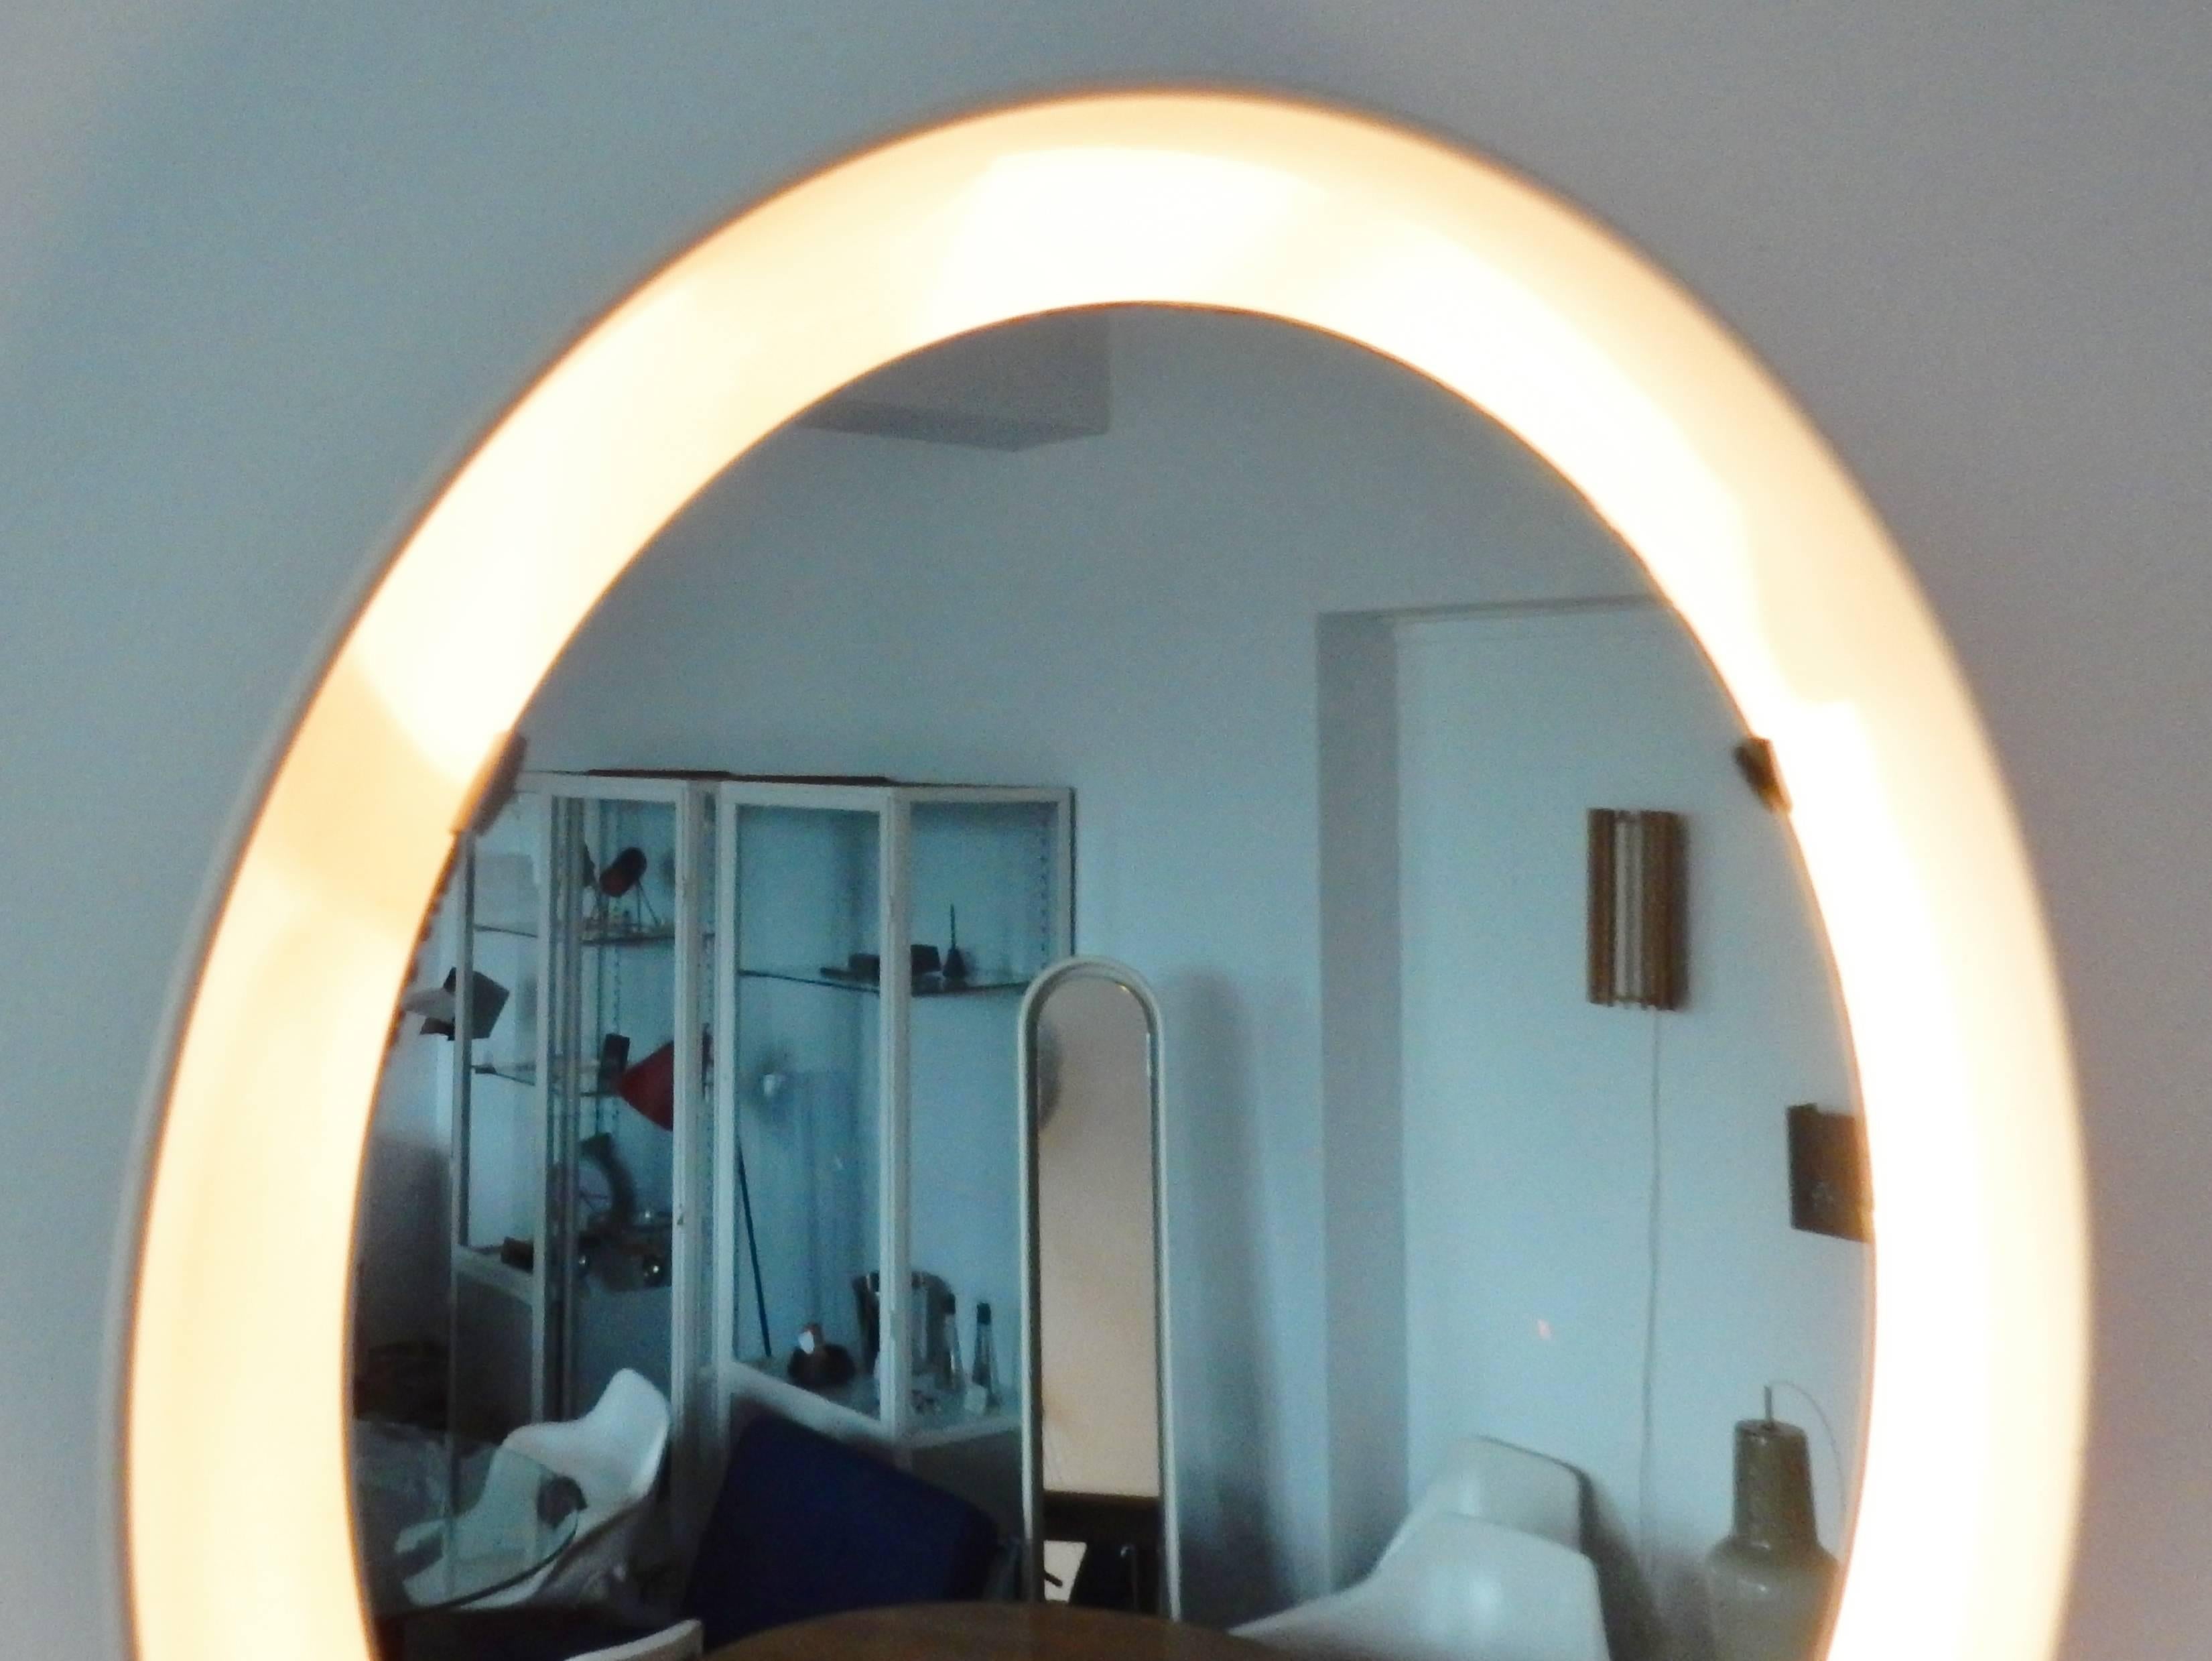 Lacquered Rare Luminated Round Mirror by Arne Jacobsen for Louis Poulsen, Denmark, 1960s